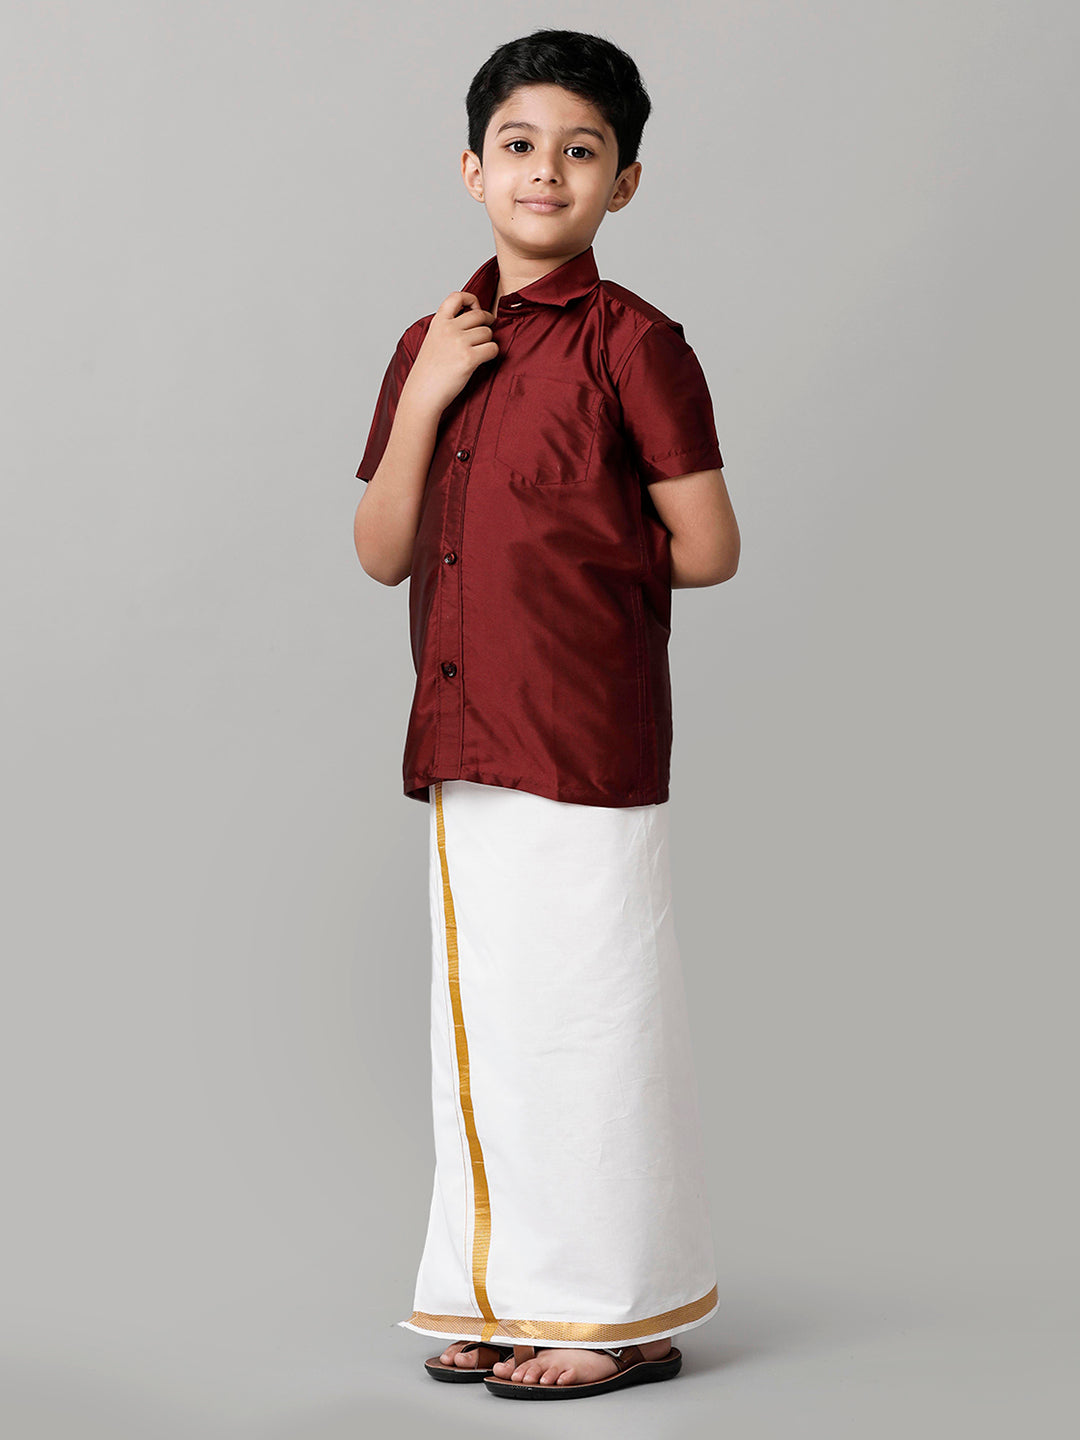 Boys Silk Cotton Maroon Half Sleeves Shirt with Adjustable White Dhoti Combo K7-Front view